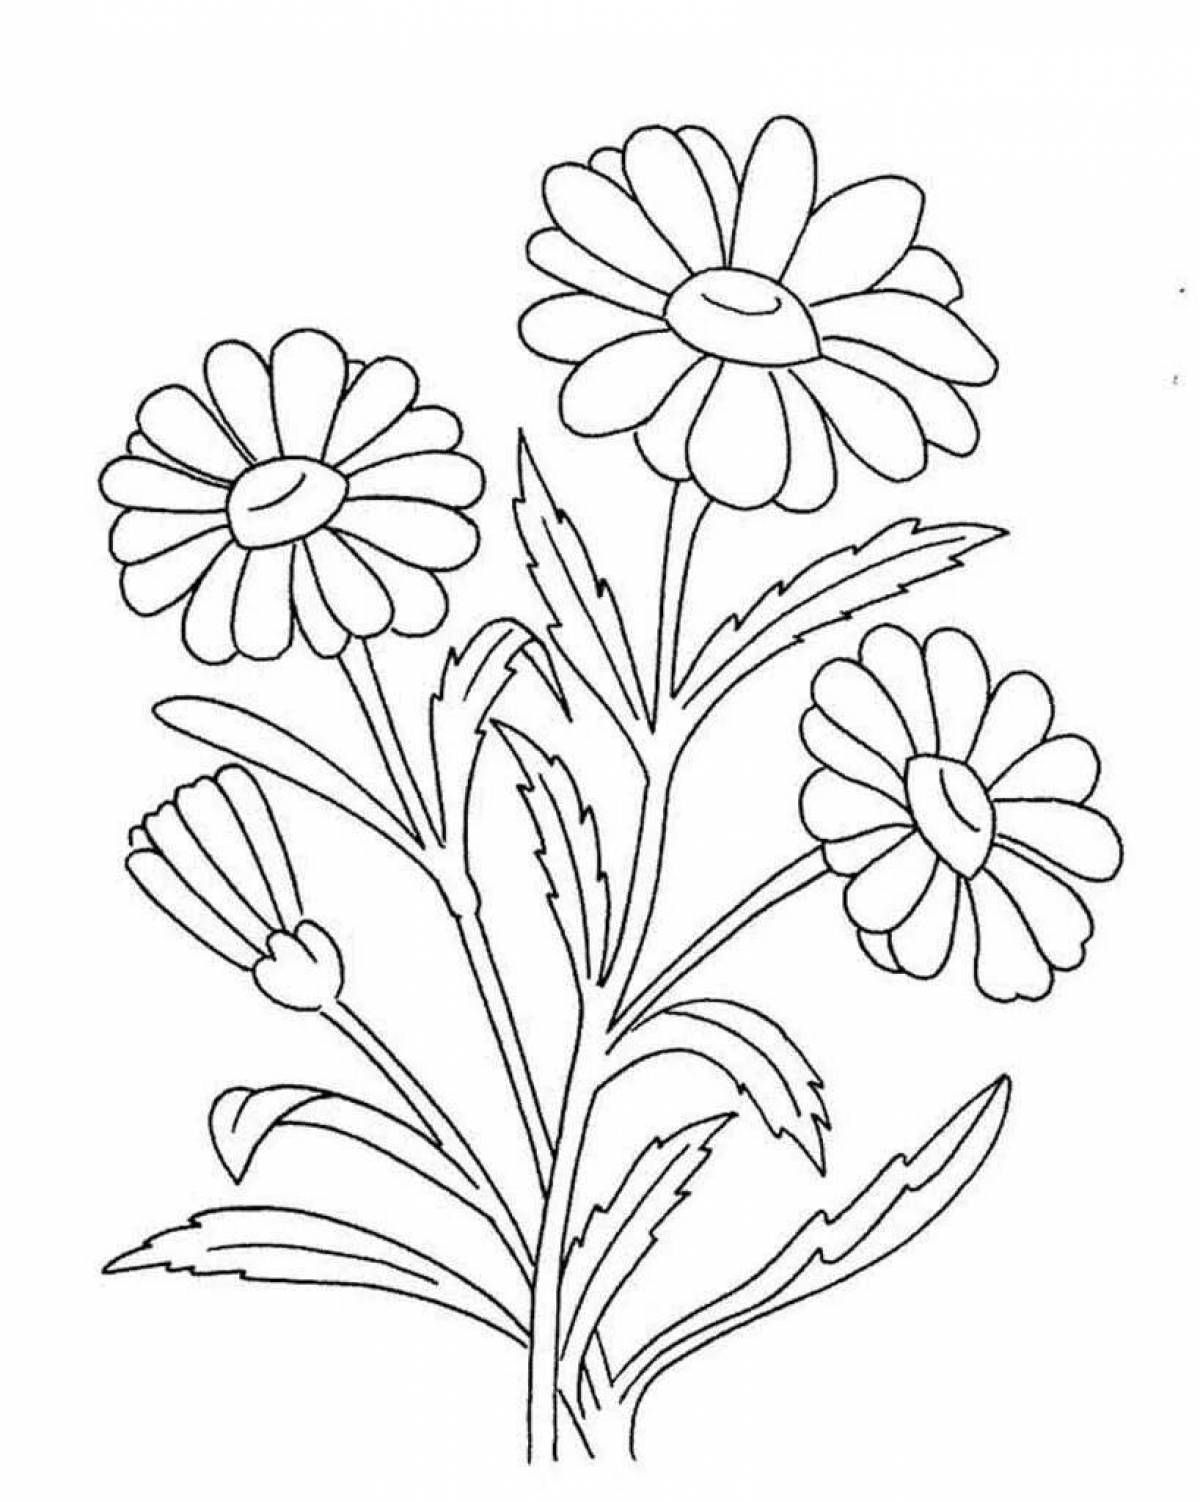 Exquisite wildflowers coloring book for kids